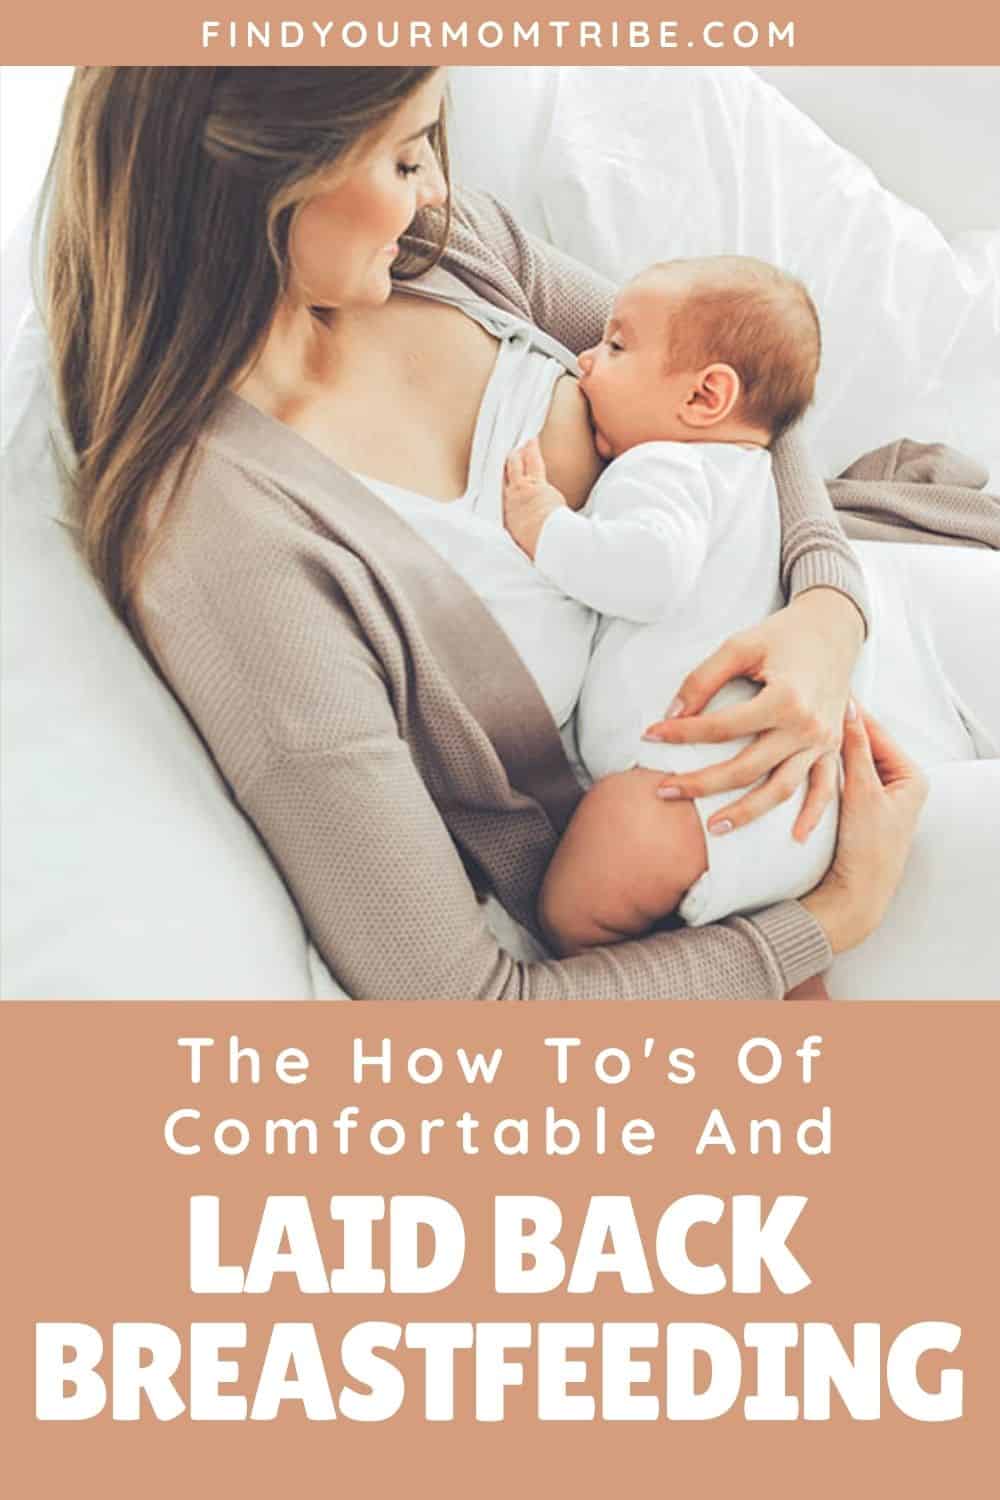 The How To's Of Comfortable And Laid Back Breastfeeding Pinterest